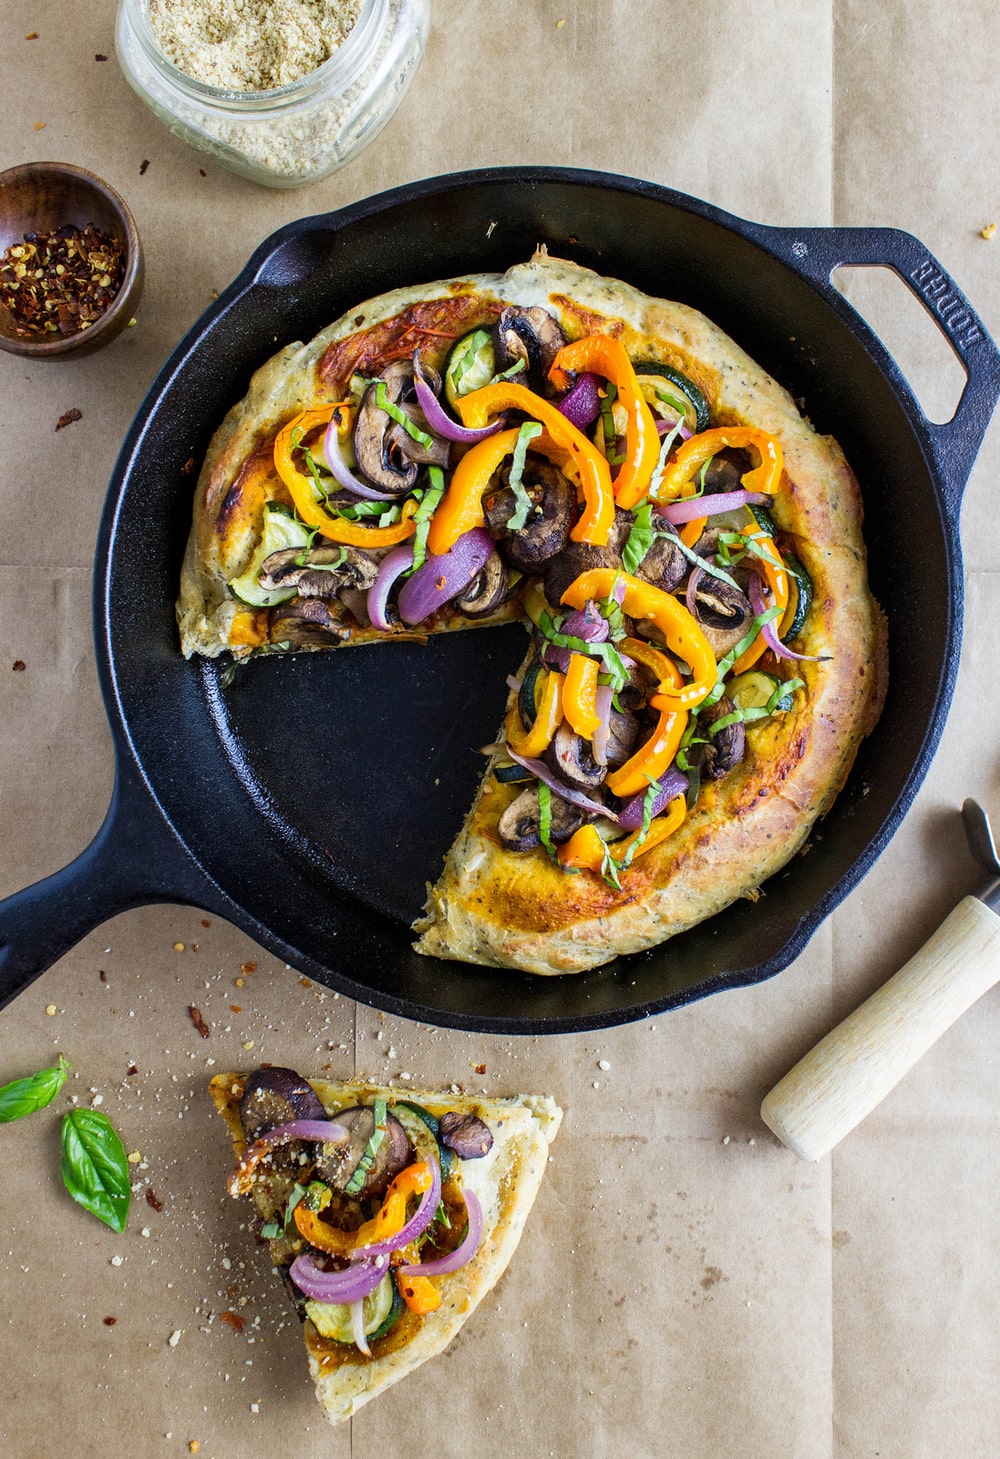 PIZZA PIE + BALSAMIC TOMATO SAUCE + ROASTED VEGETABLES